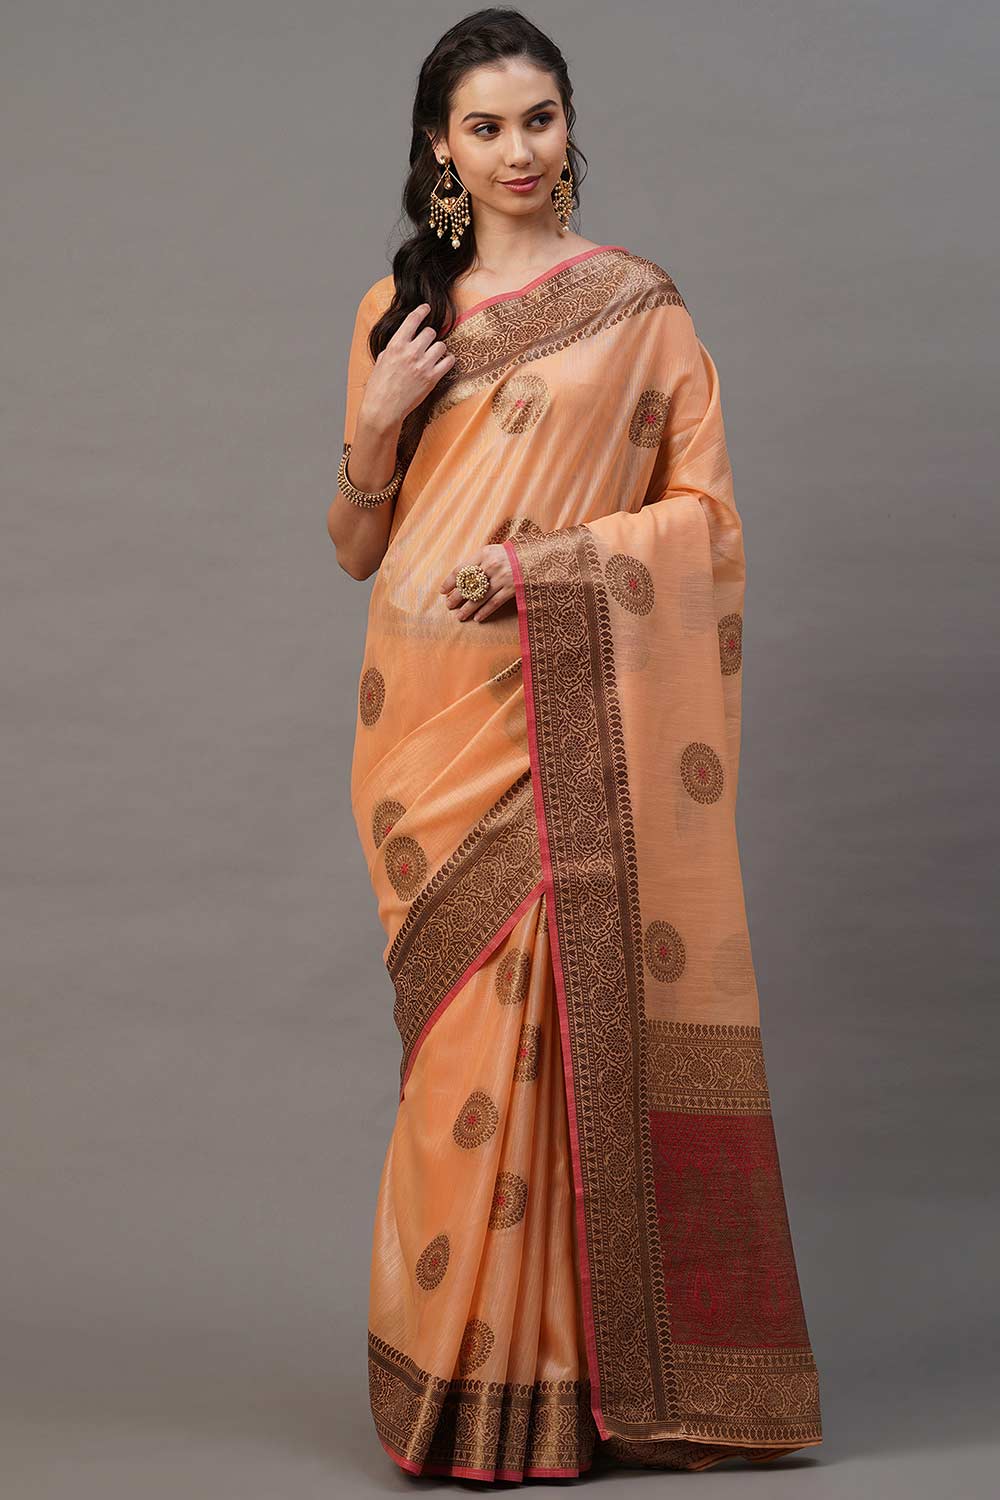 Buy Peach Woven Blended Silk One Minute Saree Online